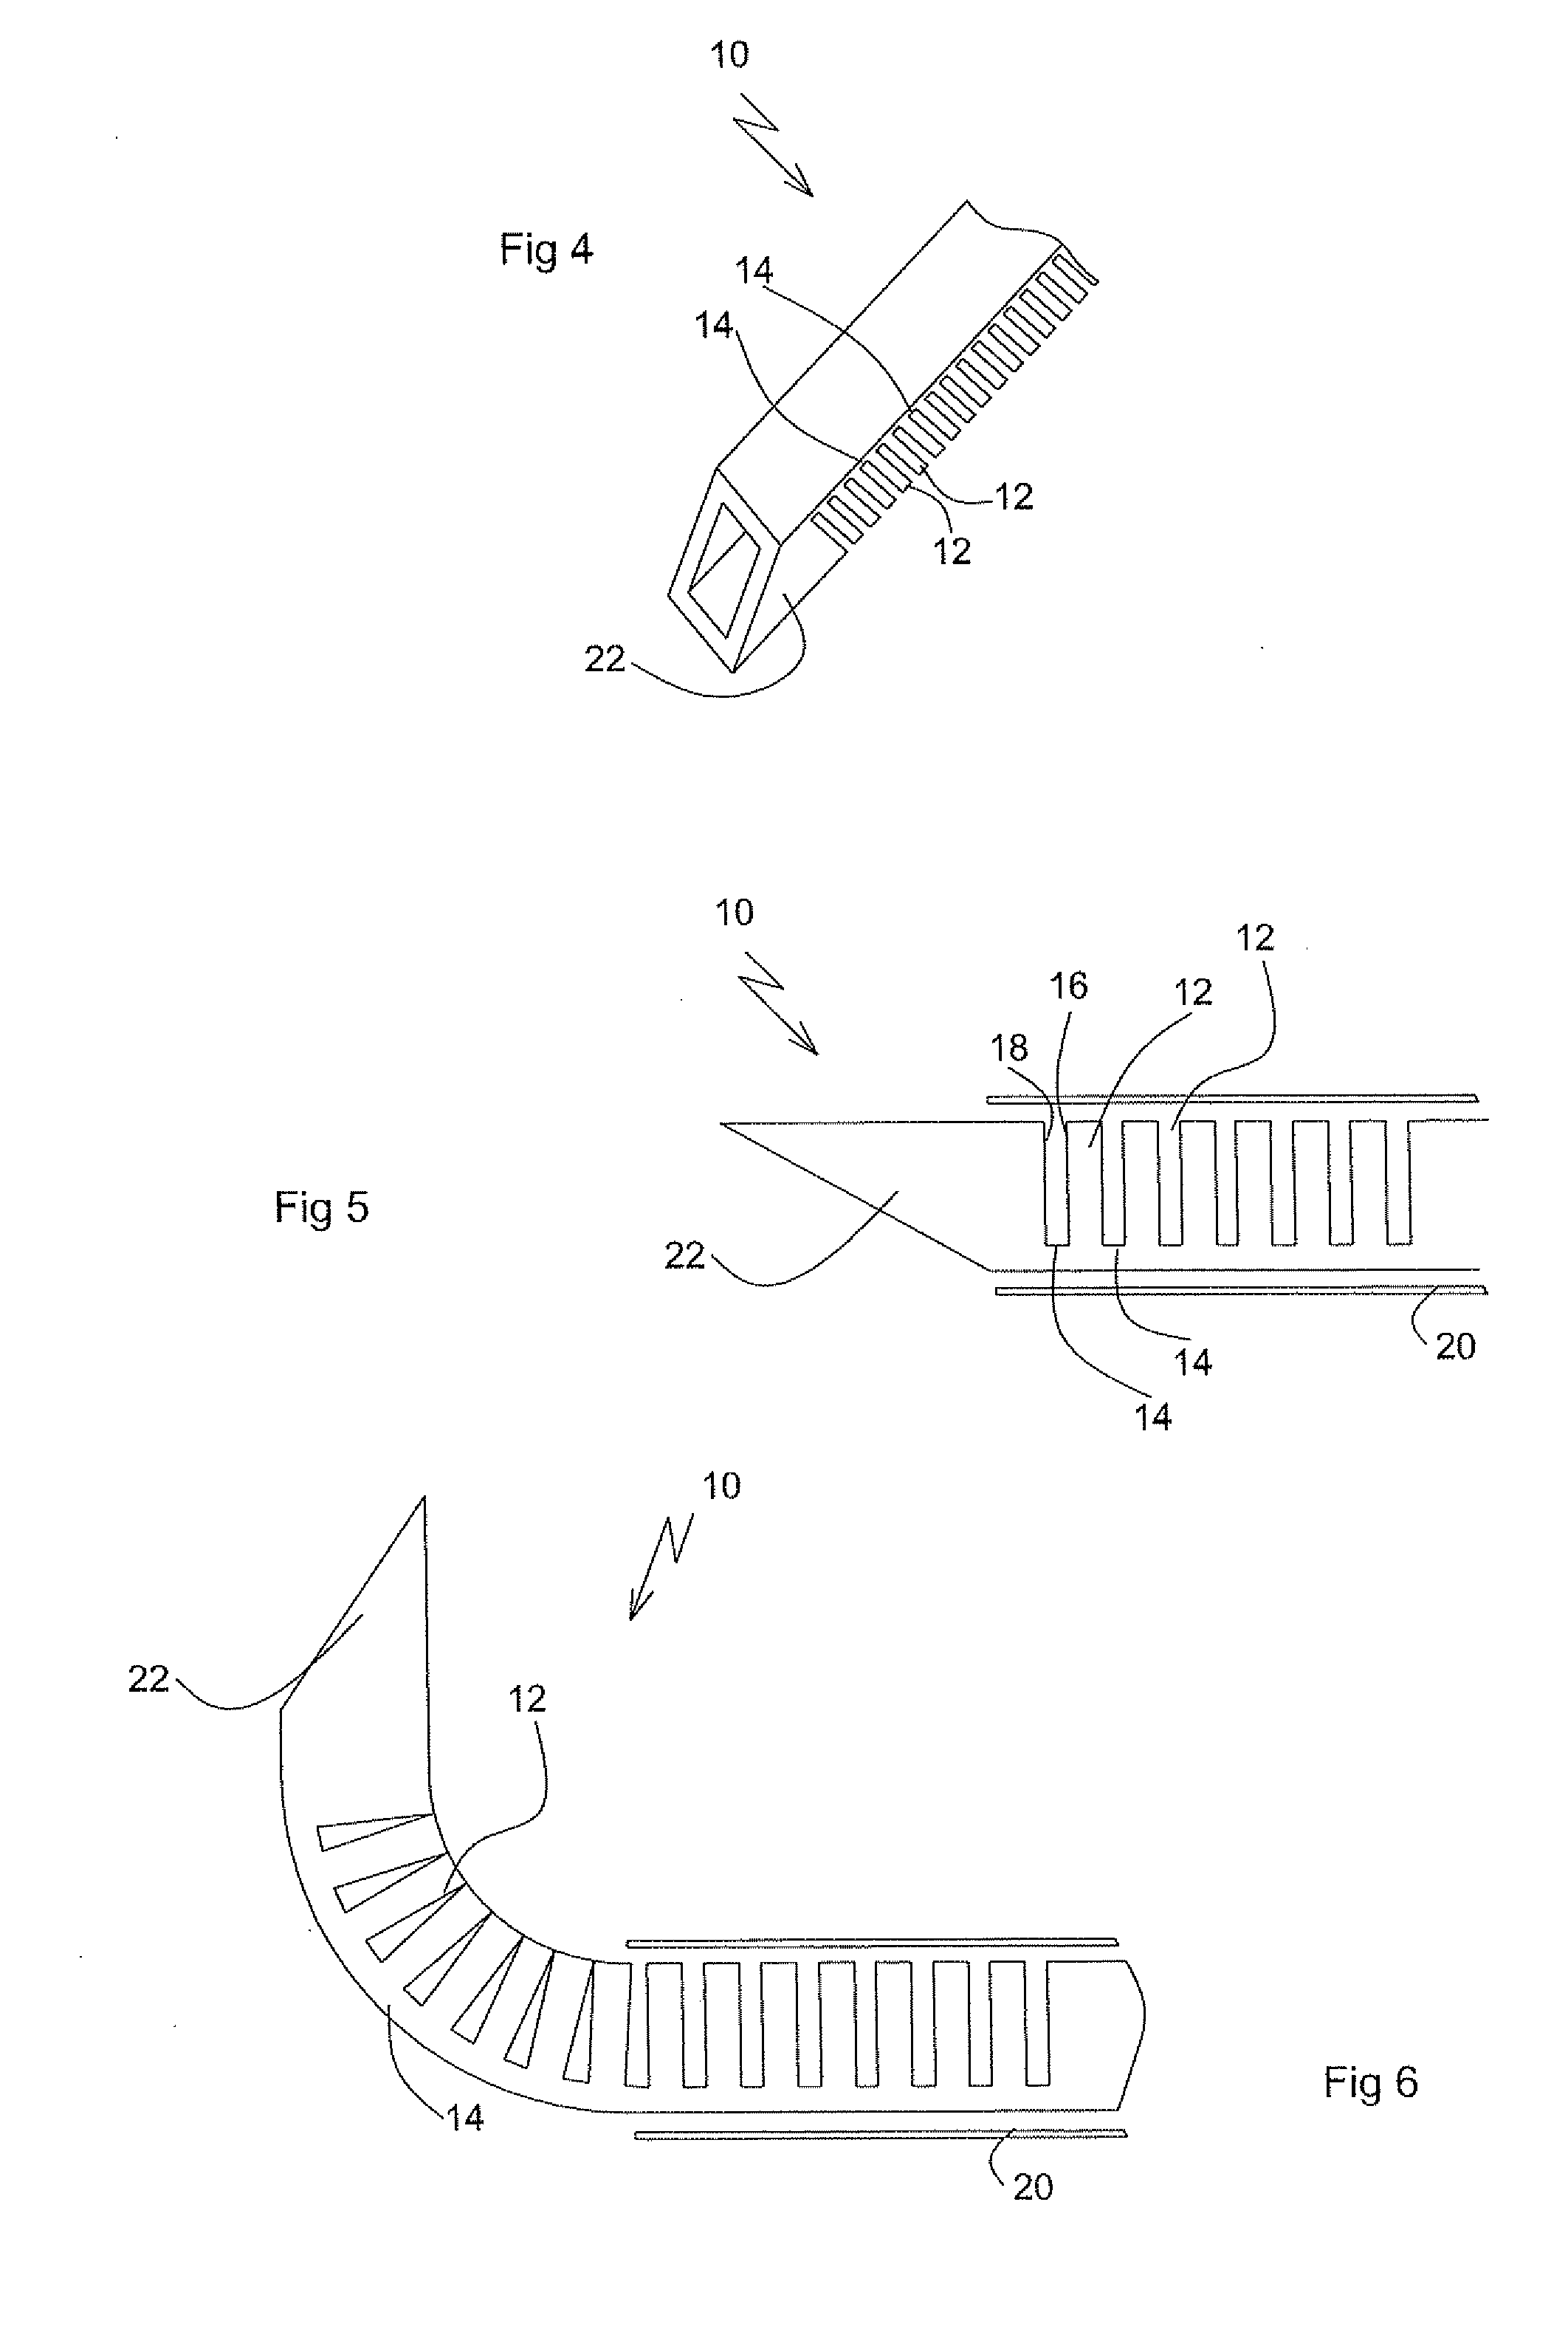 Devices For Introduction Into A Body Via A Substantially Straight Conduit To For a Predefined Curved Configuration, And Methods Employing Such Devices